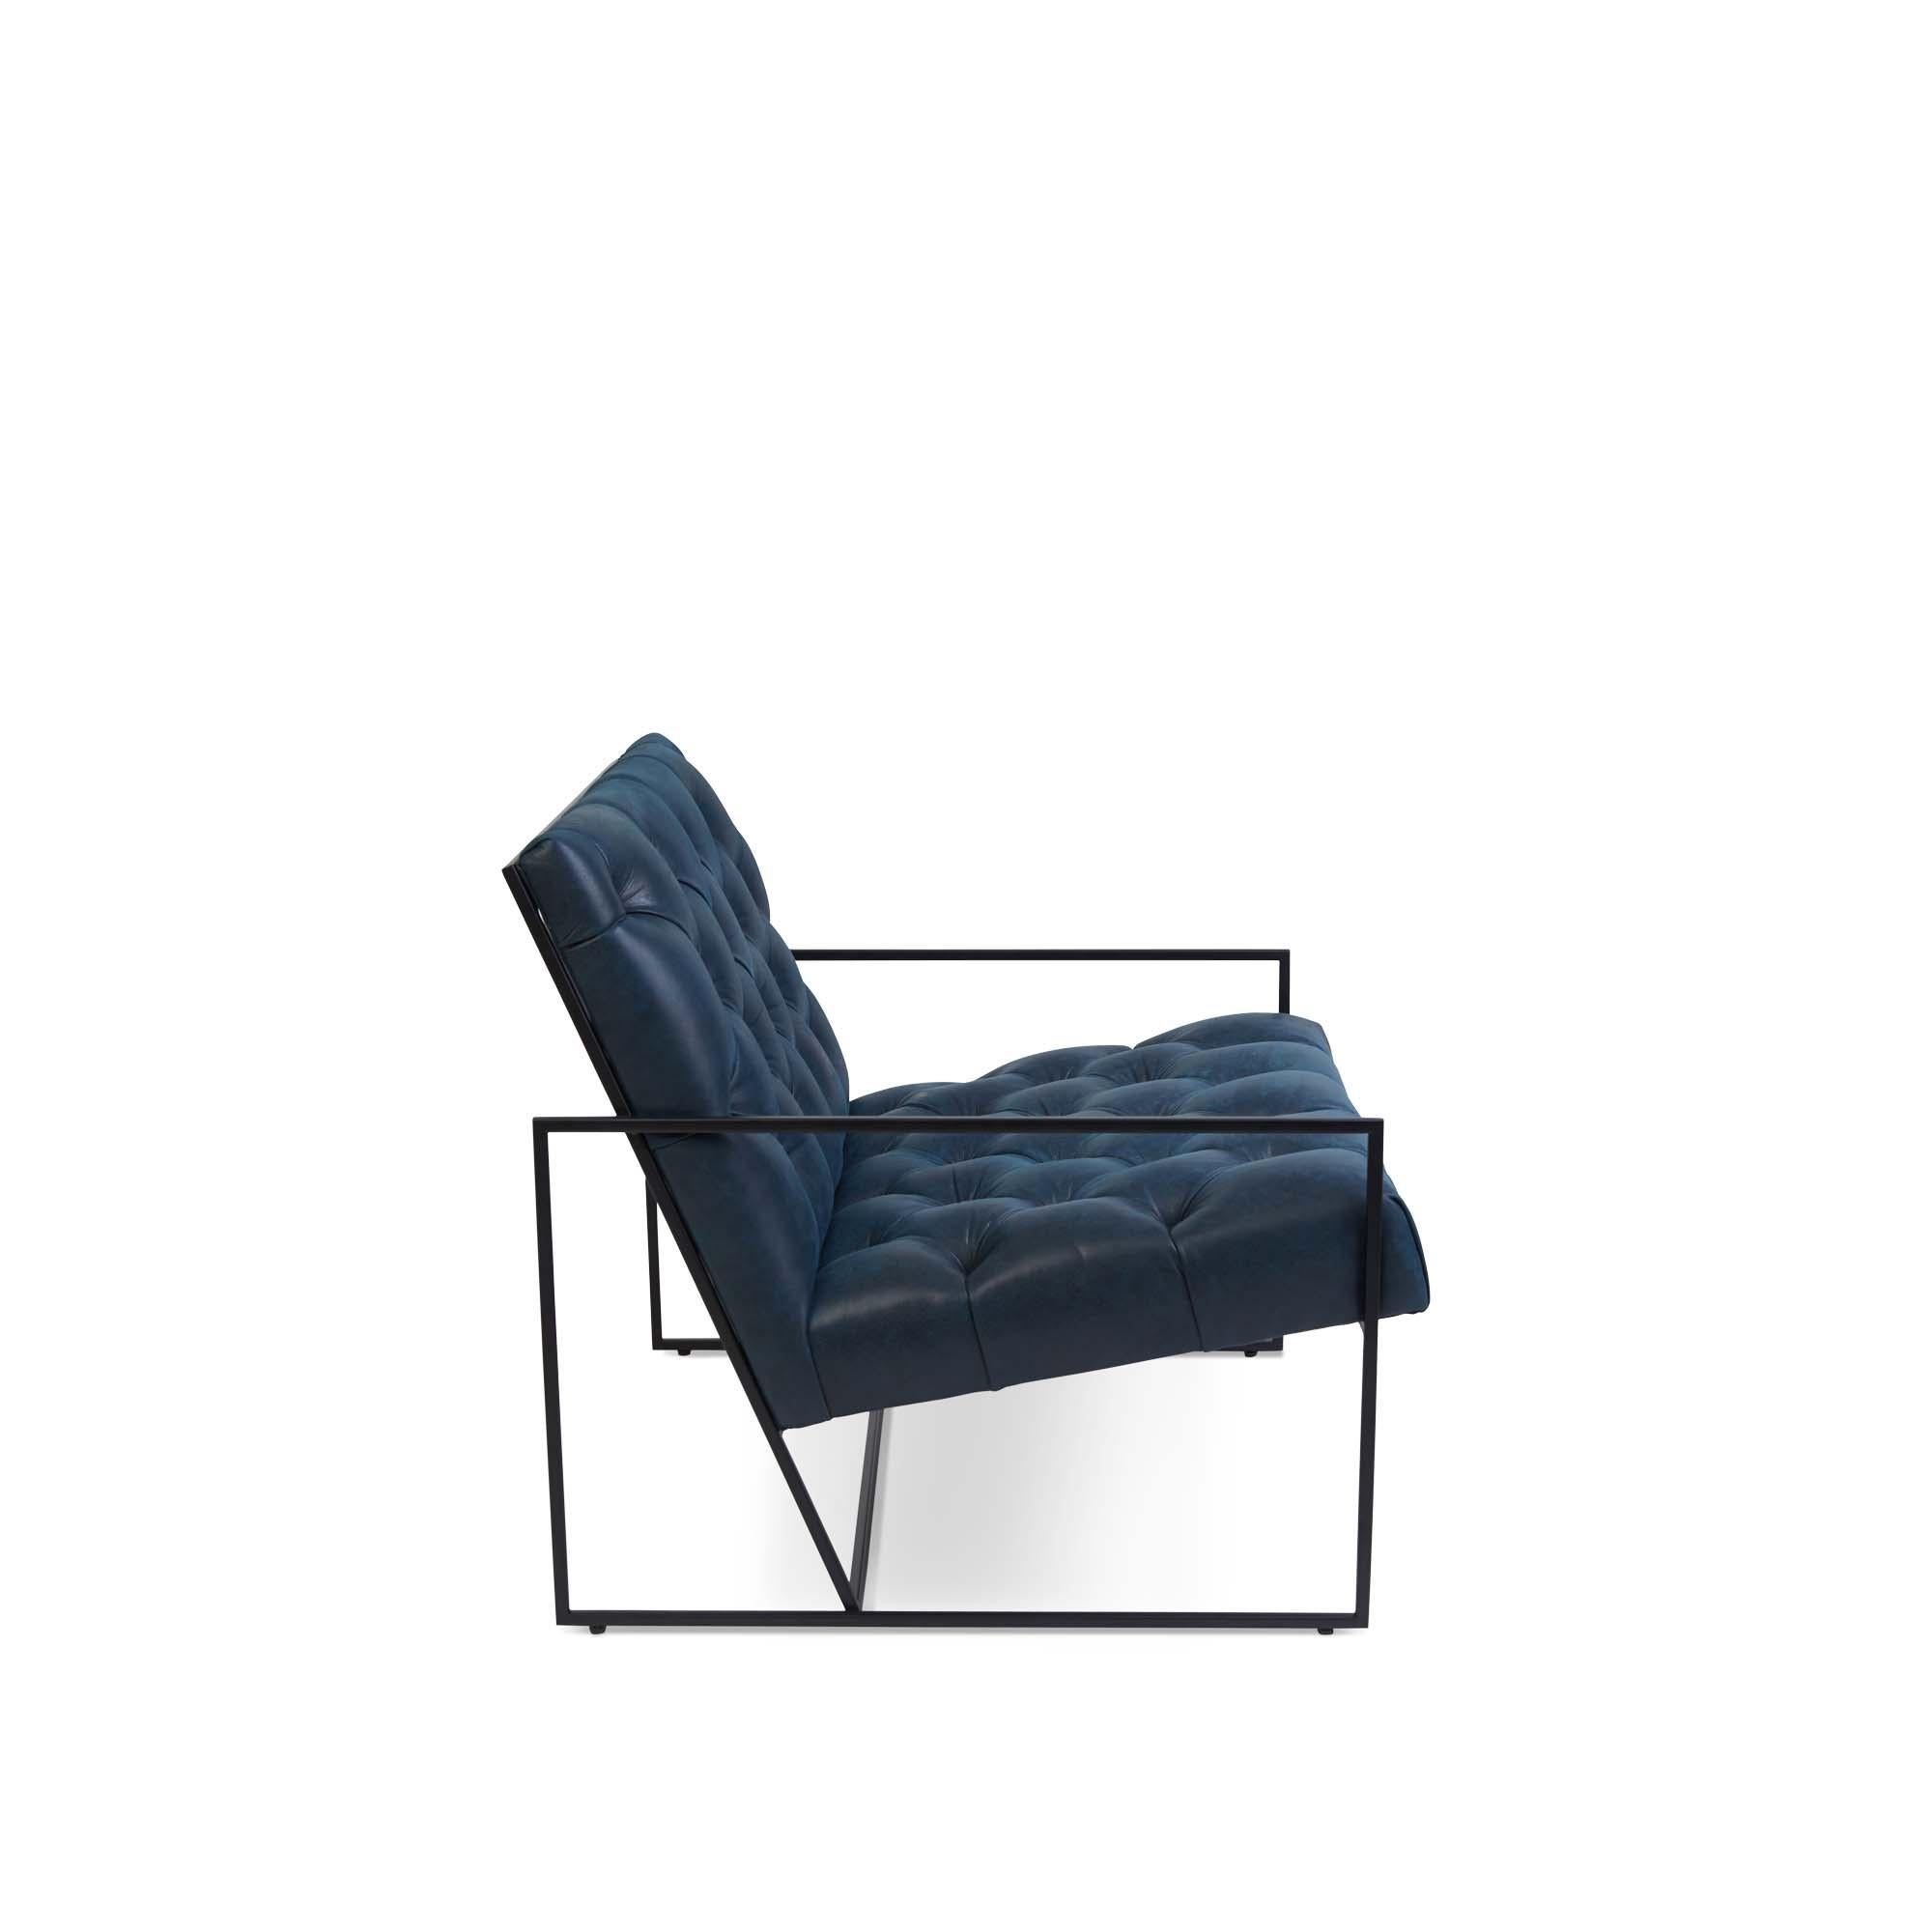 The Thin frame lounge chair is a modern lounge chair with a low-profile, thin metal frame that is available in an array of finishes and the option of diamond tufting. 

The Lawson-Fenning Collection is designed and handmade in Los Angeles,